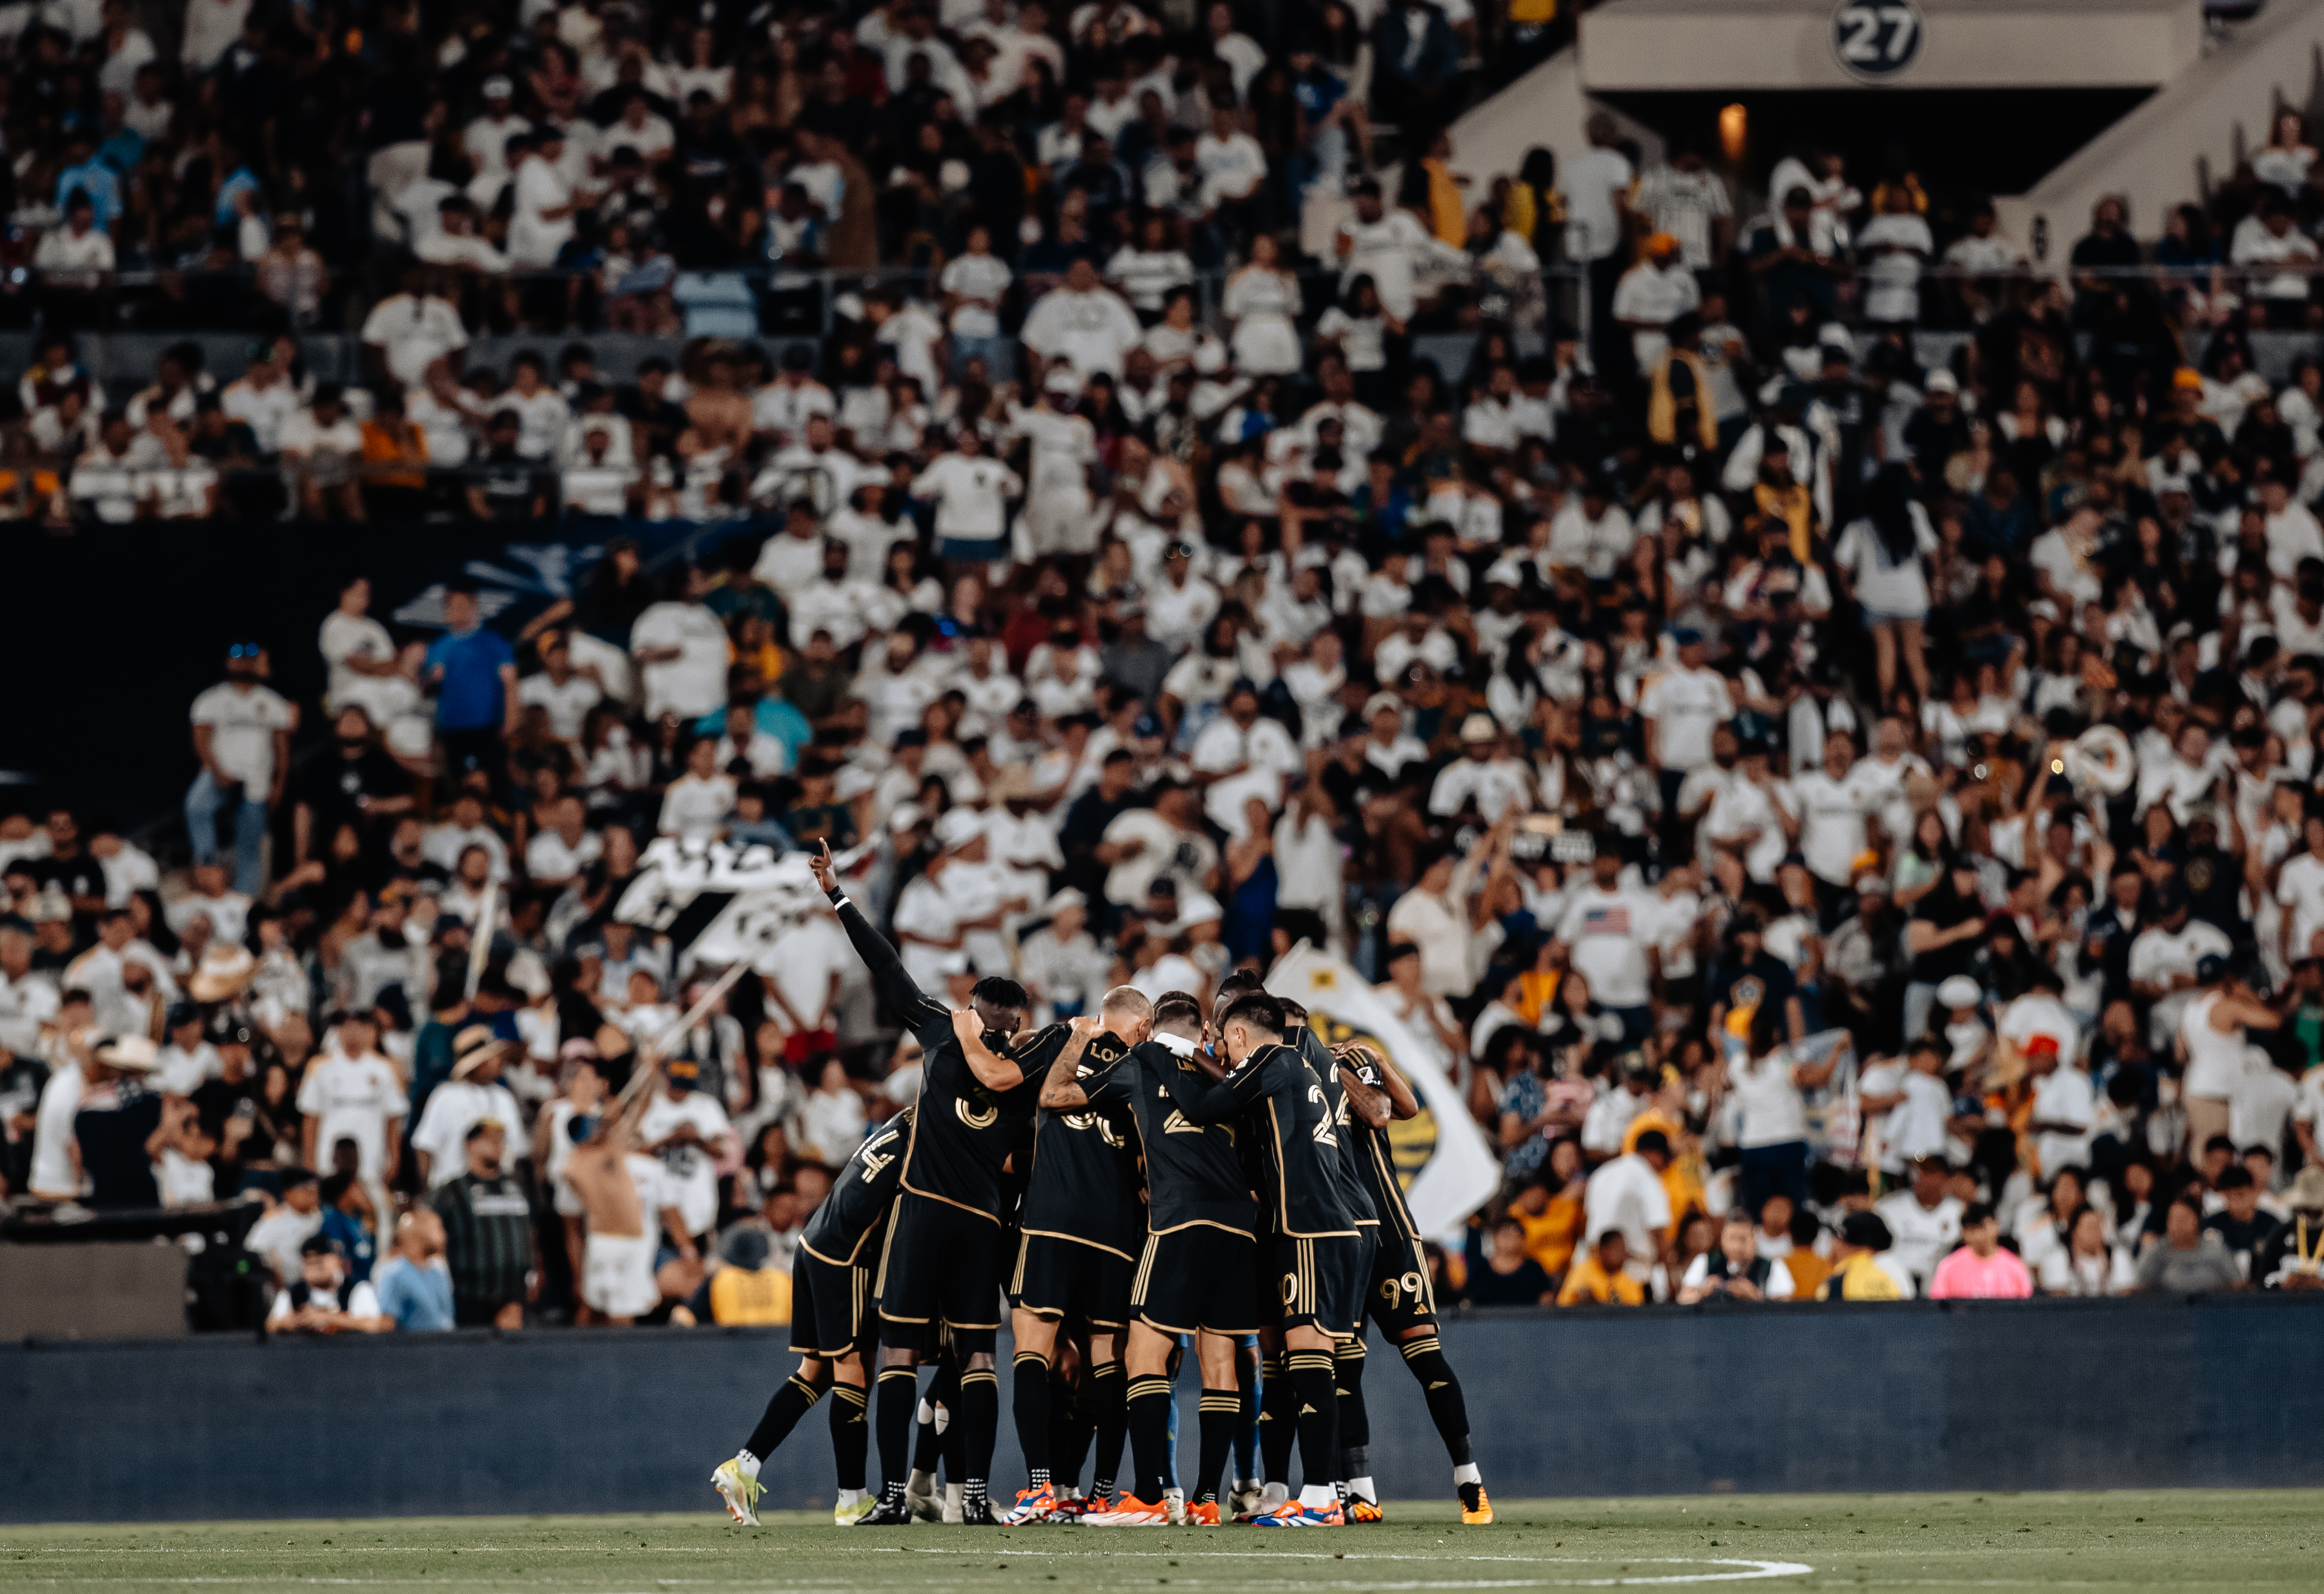 LAFC players huddle after securing a win over the Galaxy on Thursday, July 4, at the Rose Bowl in Pasadena.